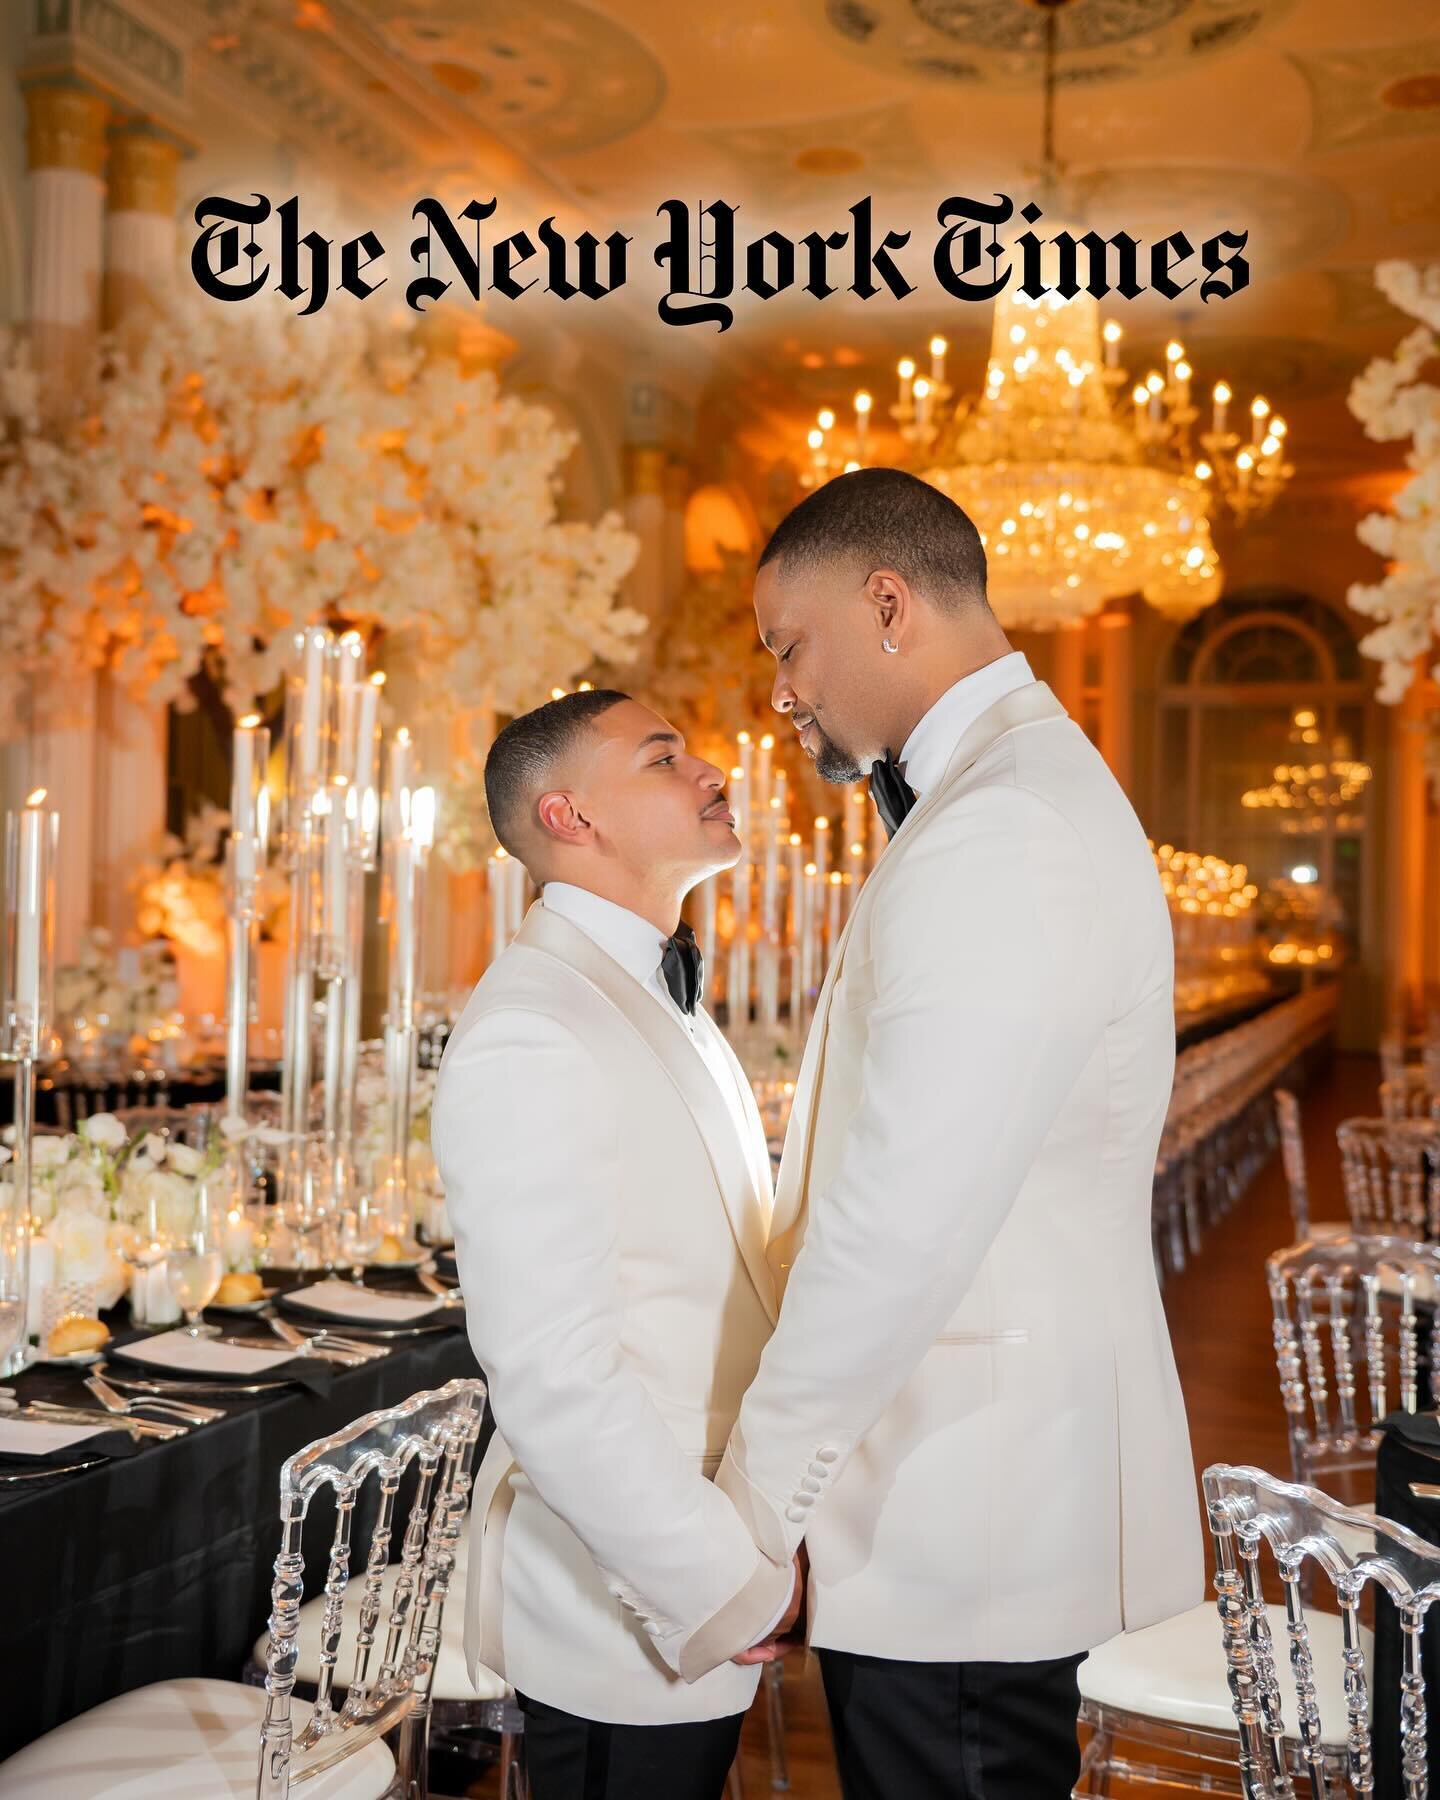 Great news! #inijephotography published in the @NYtimes !

Recent had the honor of capturing this beautiful wedding. Congrats to the amazing couple.

&bull;@awbeach @sejourevents @biltmoreballrooms @blackops.productions @cakesbylameeka @warrenhuntley